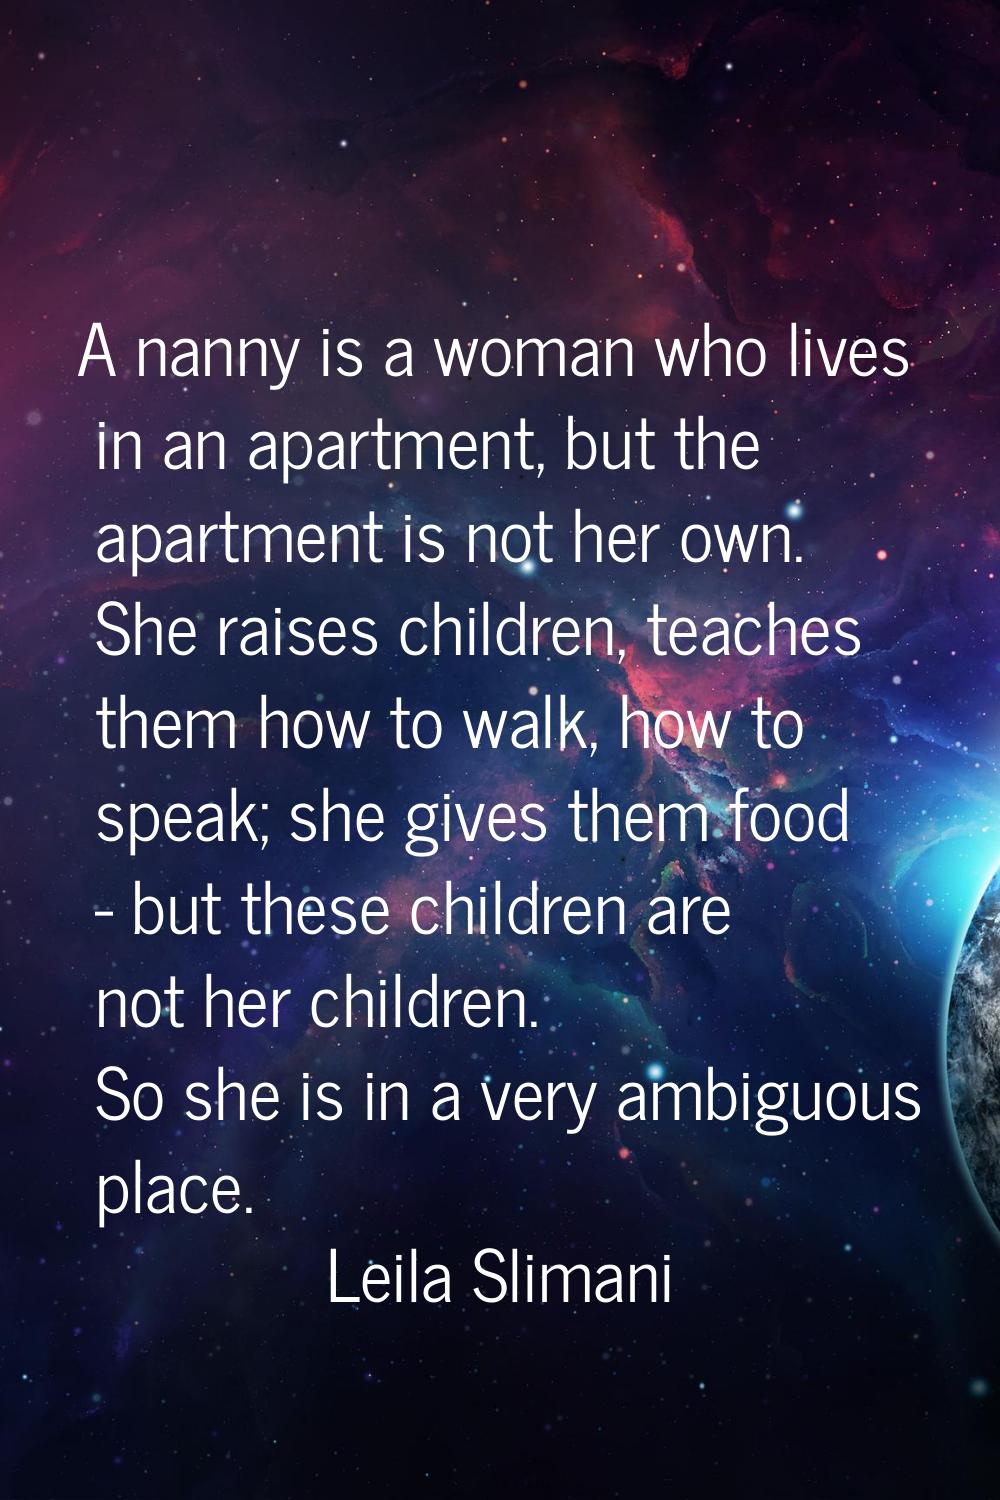 A nanny is a woman who lives in an apartment, but the apartment is not her own. She raises children